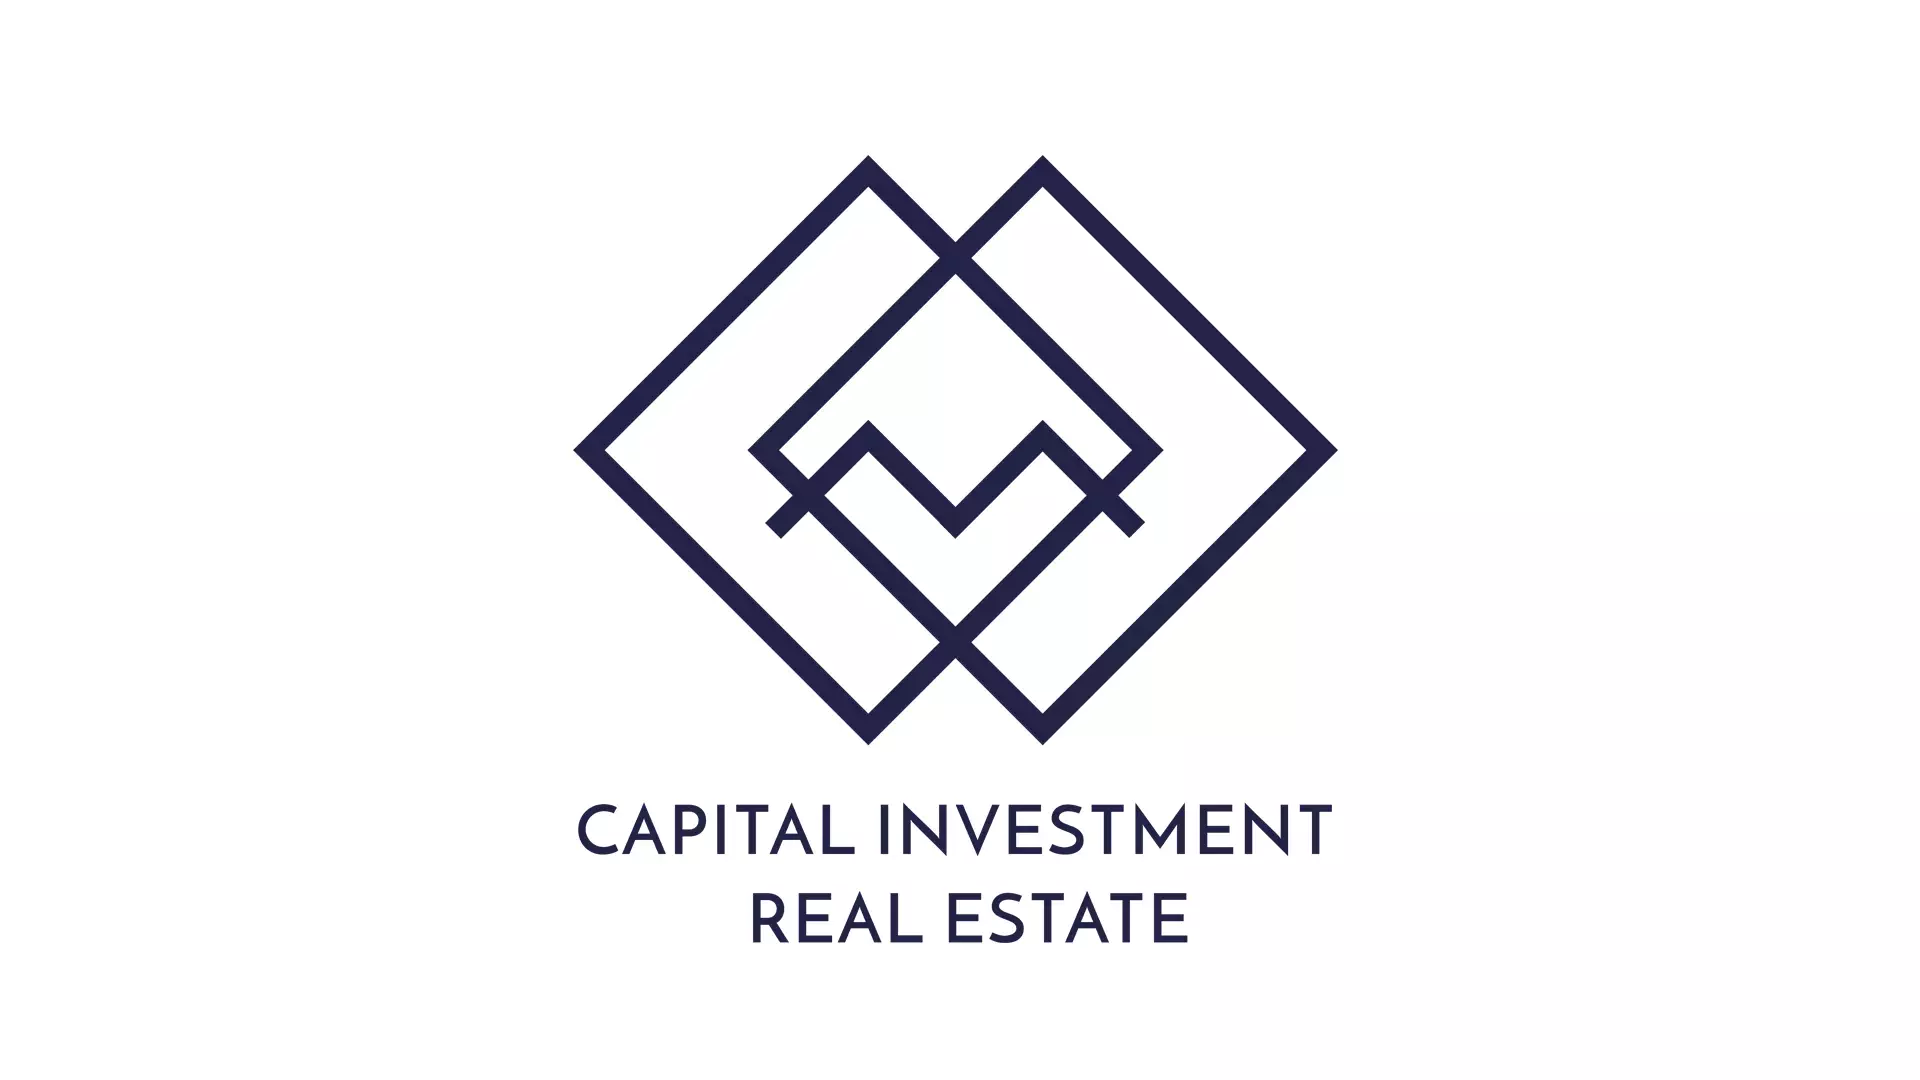 Capital Investment Logo - Capital Investment Real Estate